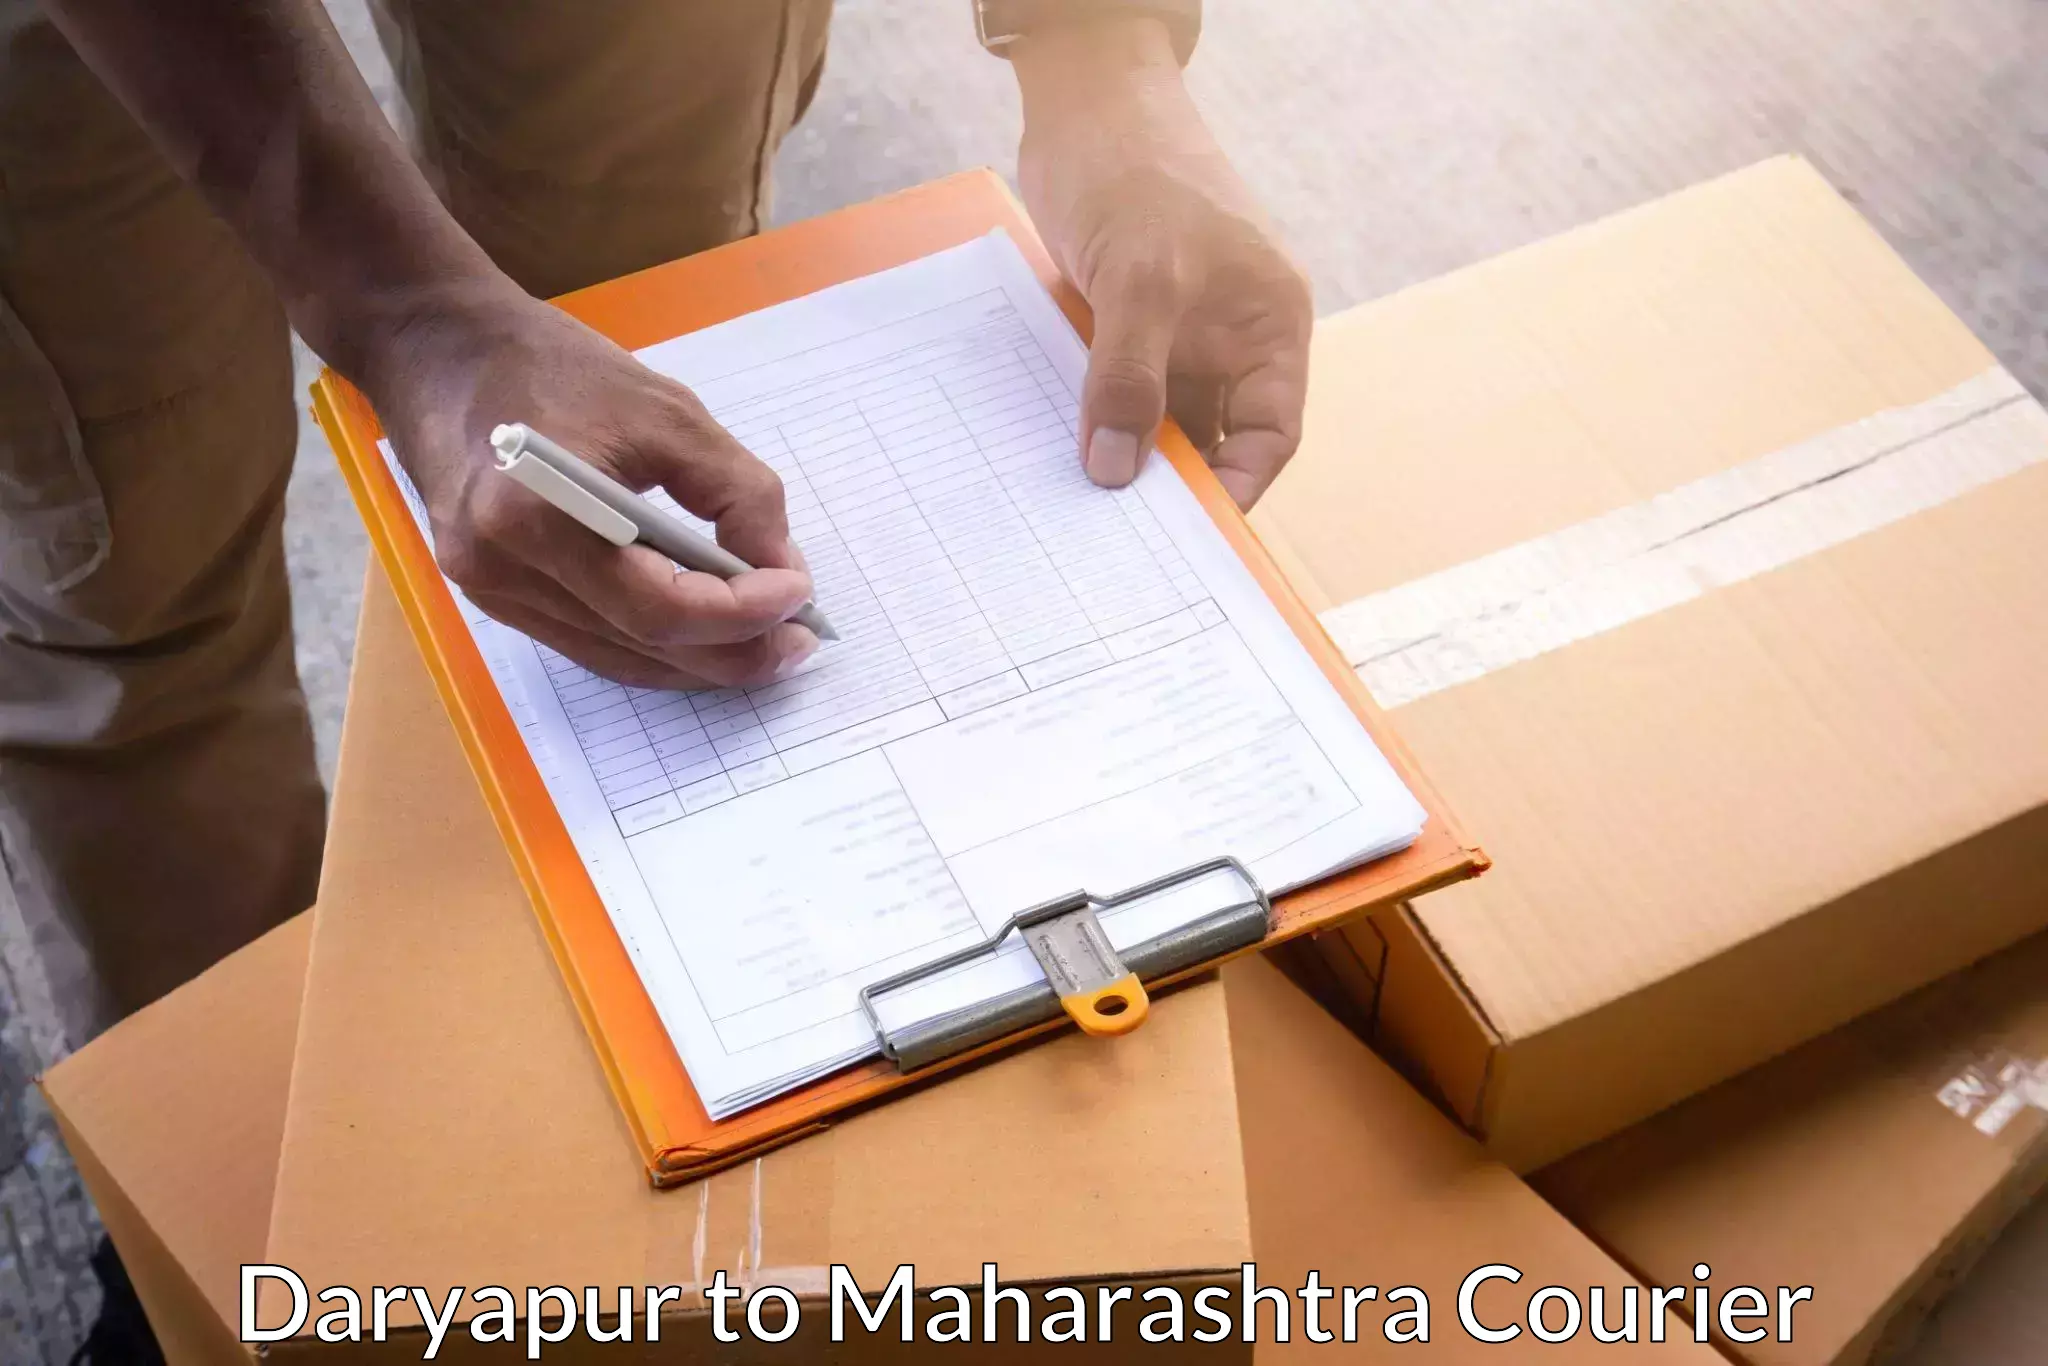 Air courier services Daryapur to Worli